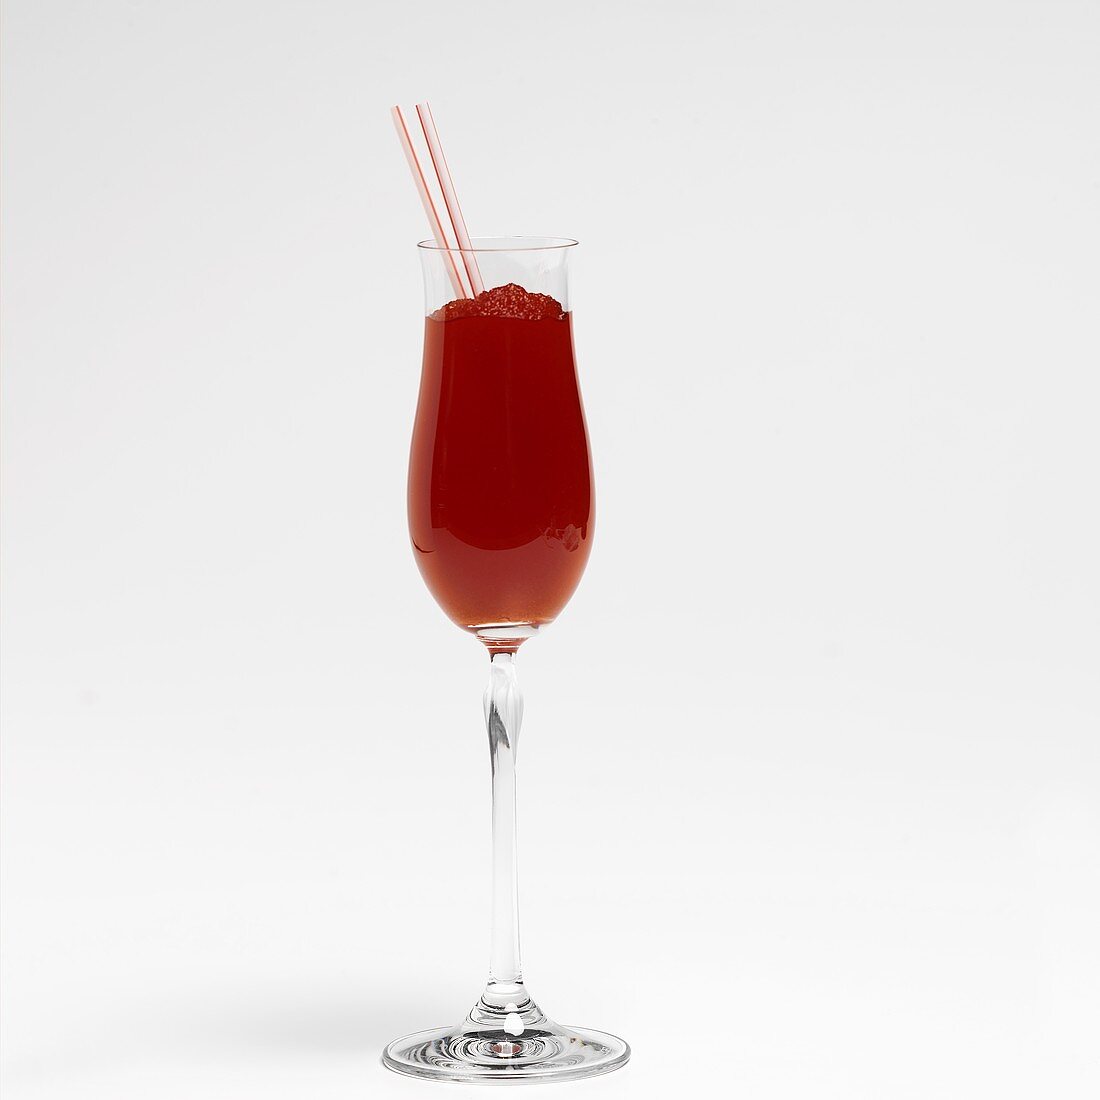 Single Tropical Blush in Stem Glass with Straw on White Background